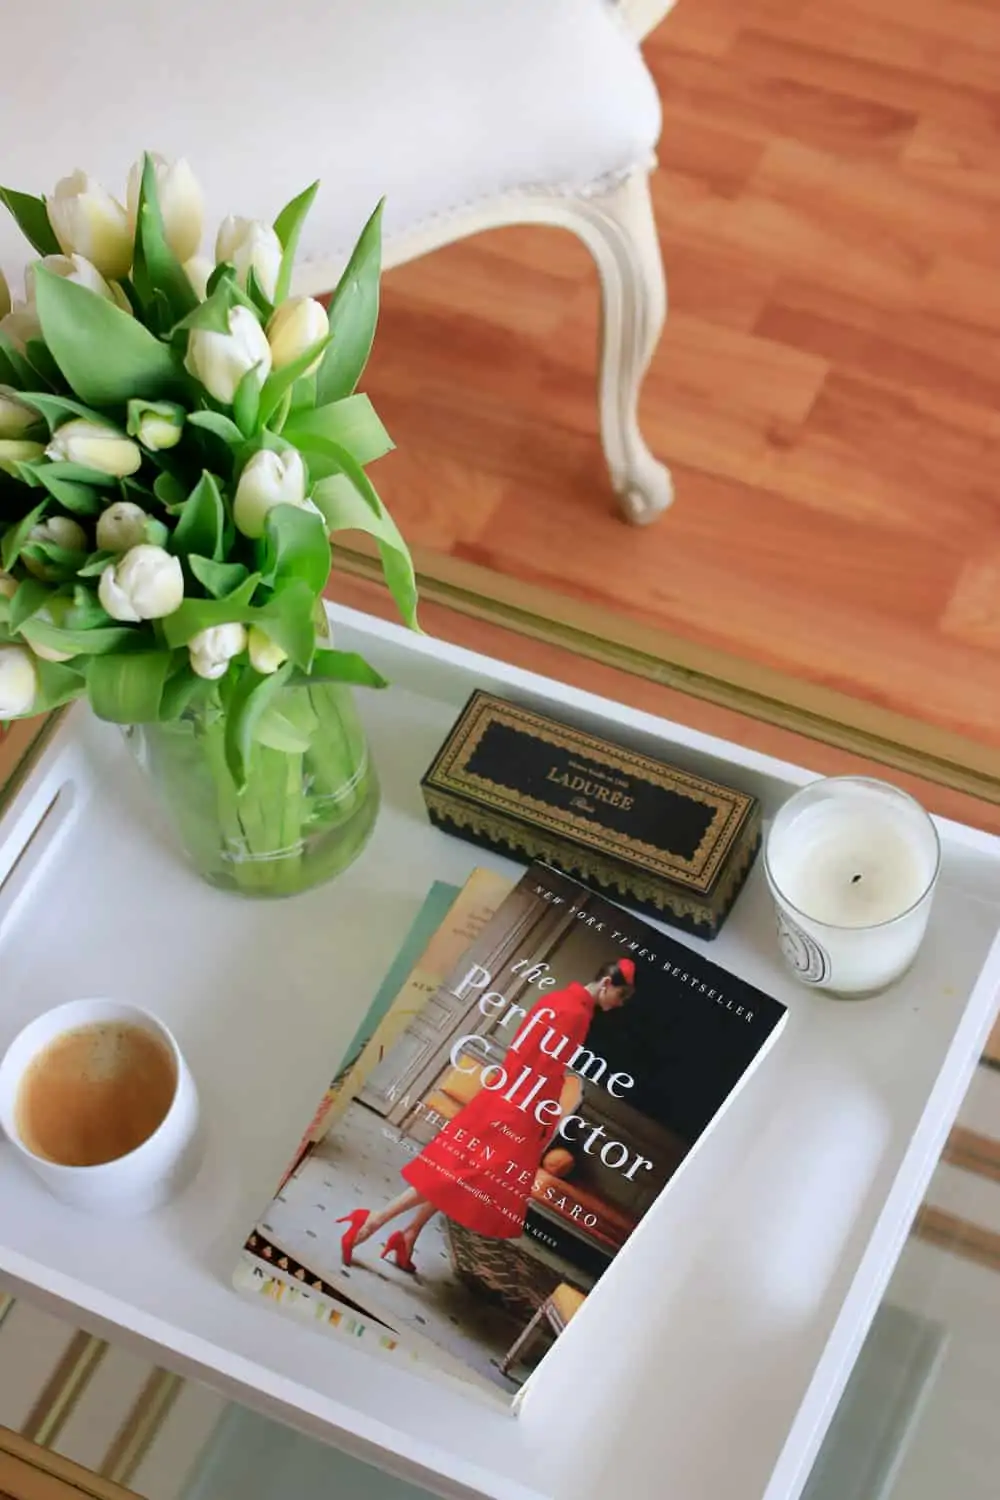 The Perfume Collector, The Every Day Parisian Book Club pick of the month